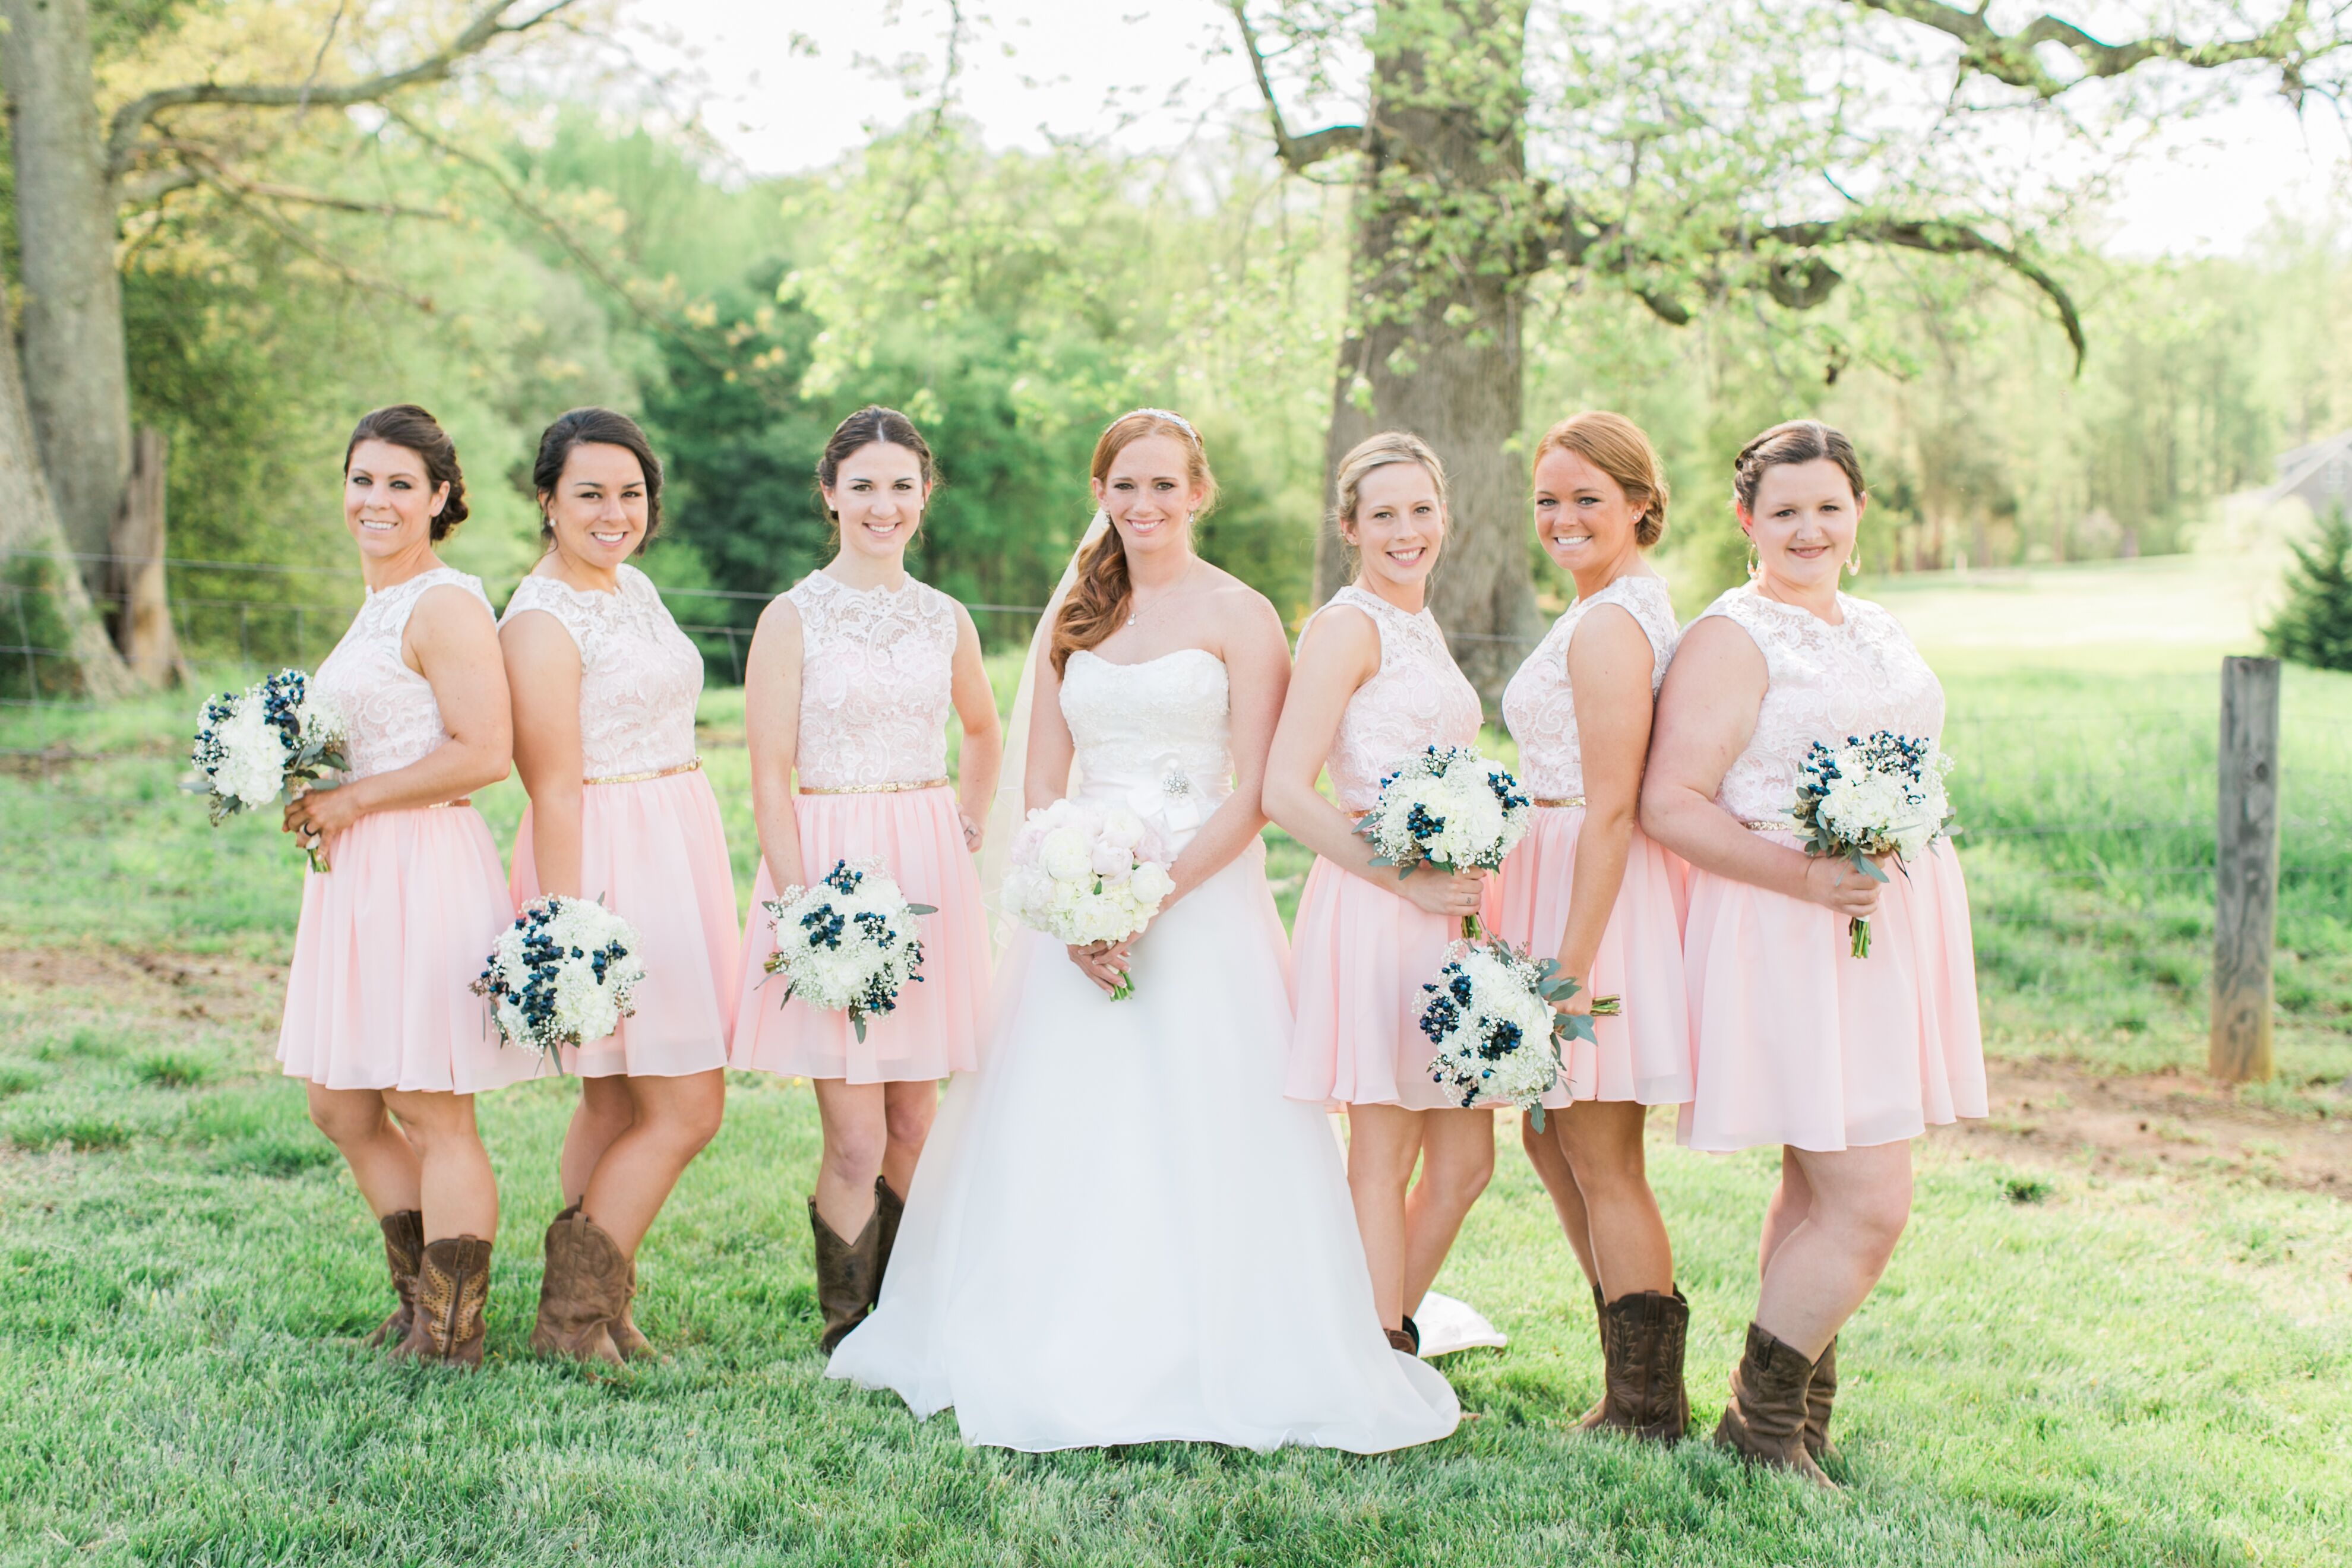 Blush Bridesmaid Dresses With Lace Overlay